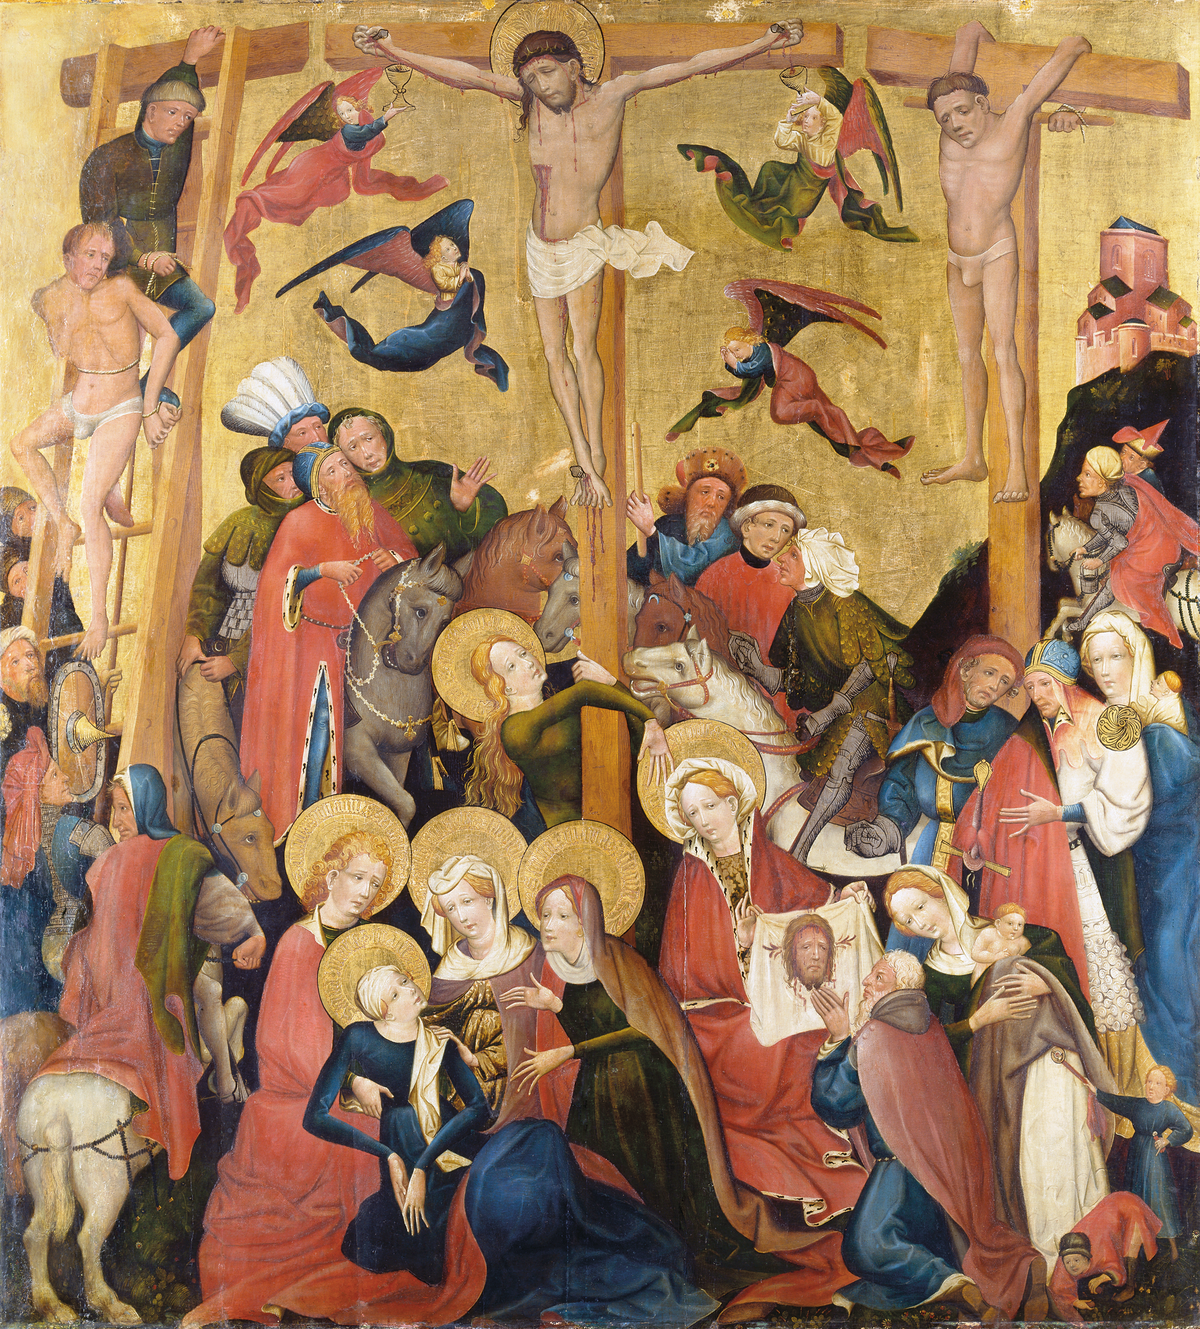 The Crucifixion (1420) by Master of the Middle Rhine - Public Domain Catholic Painting